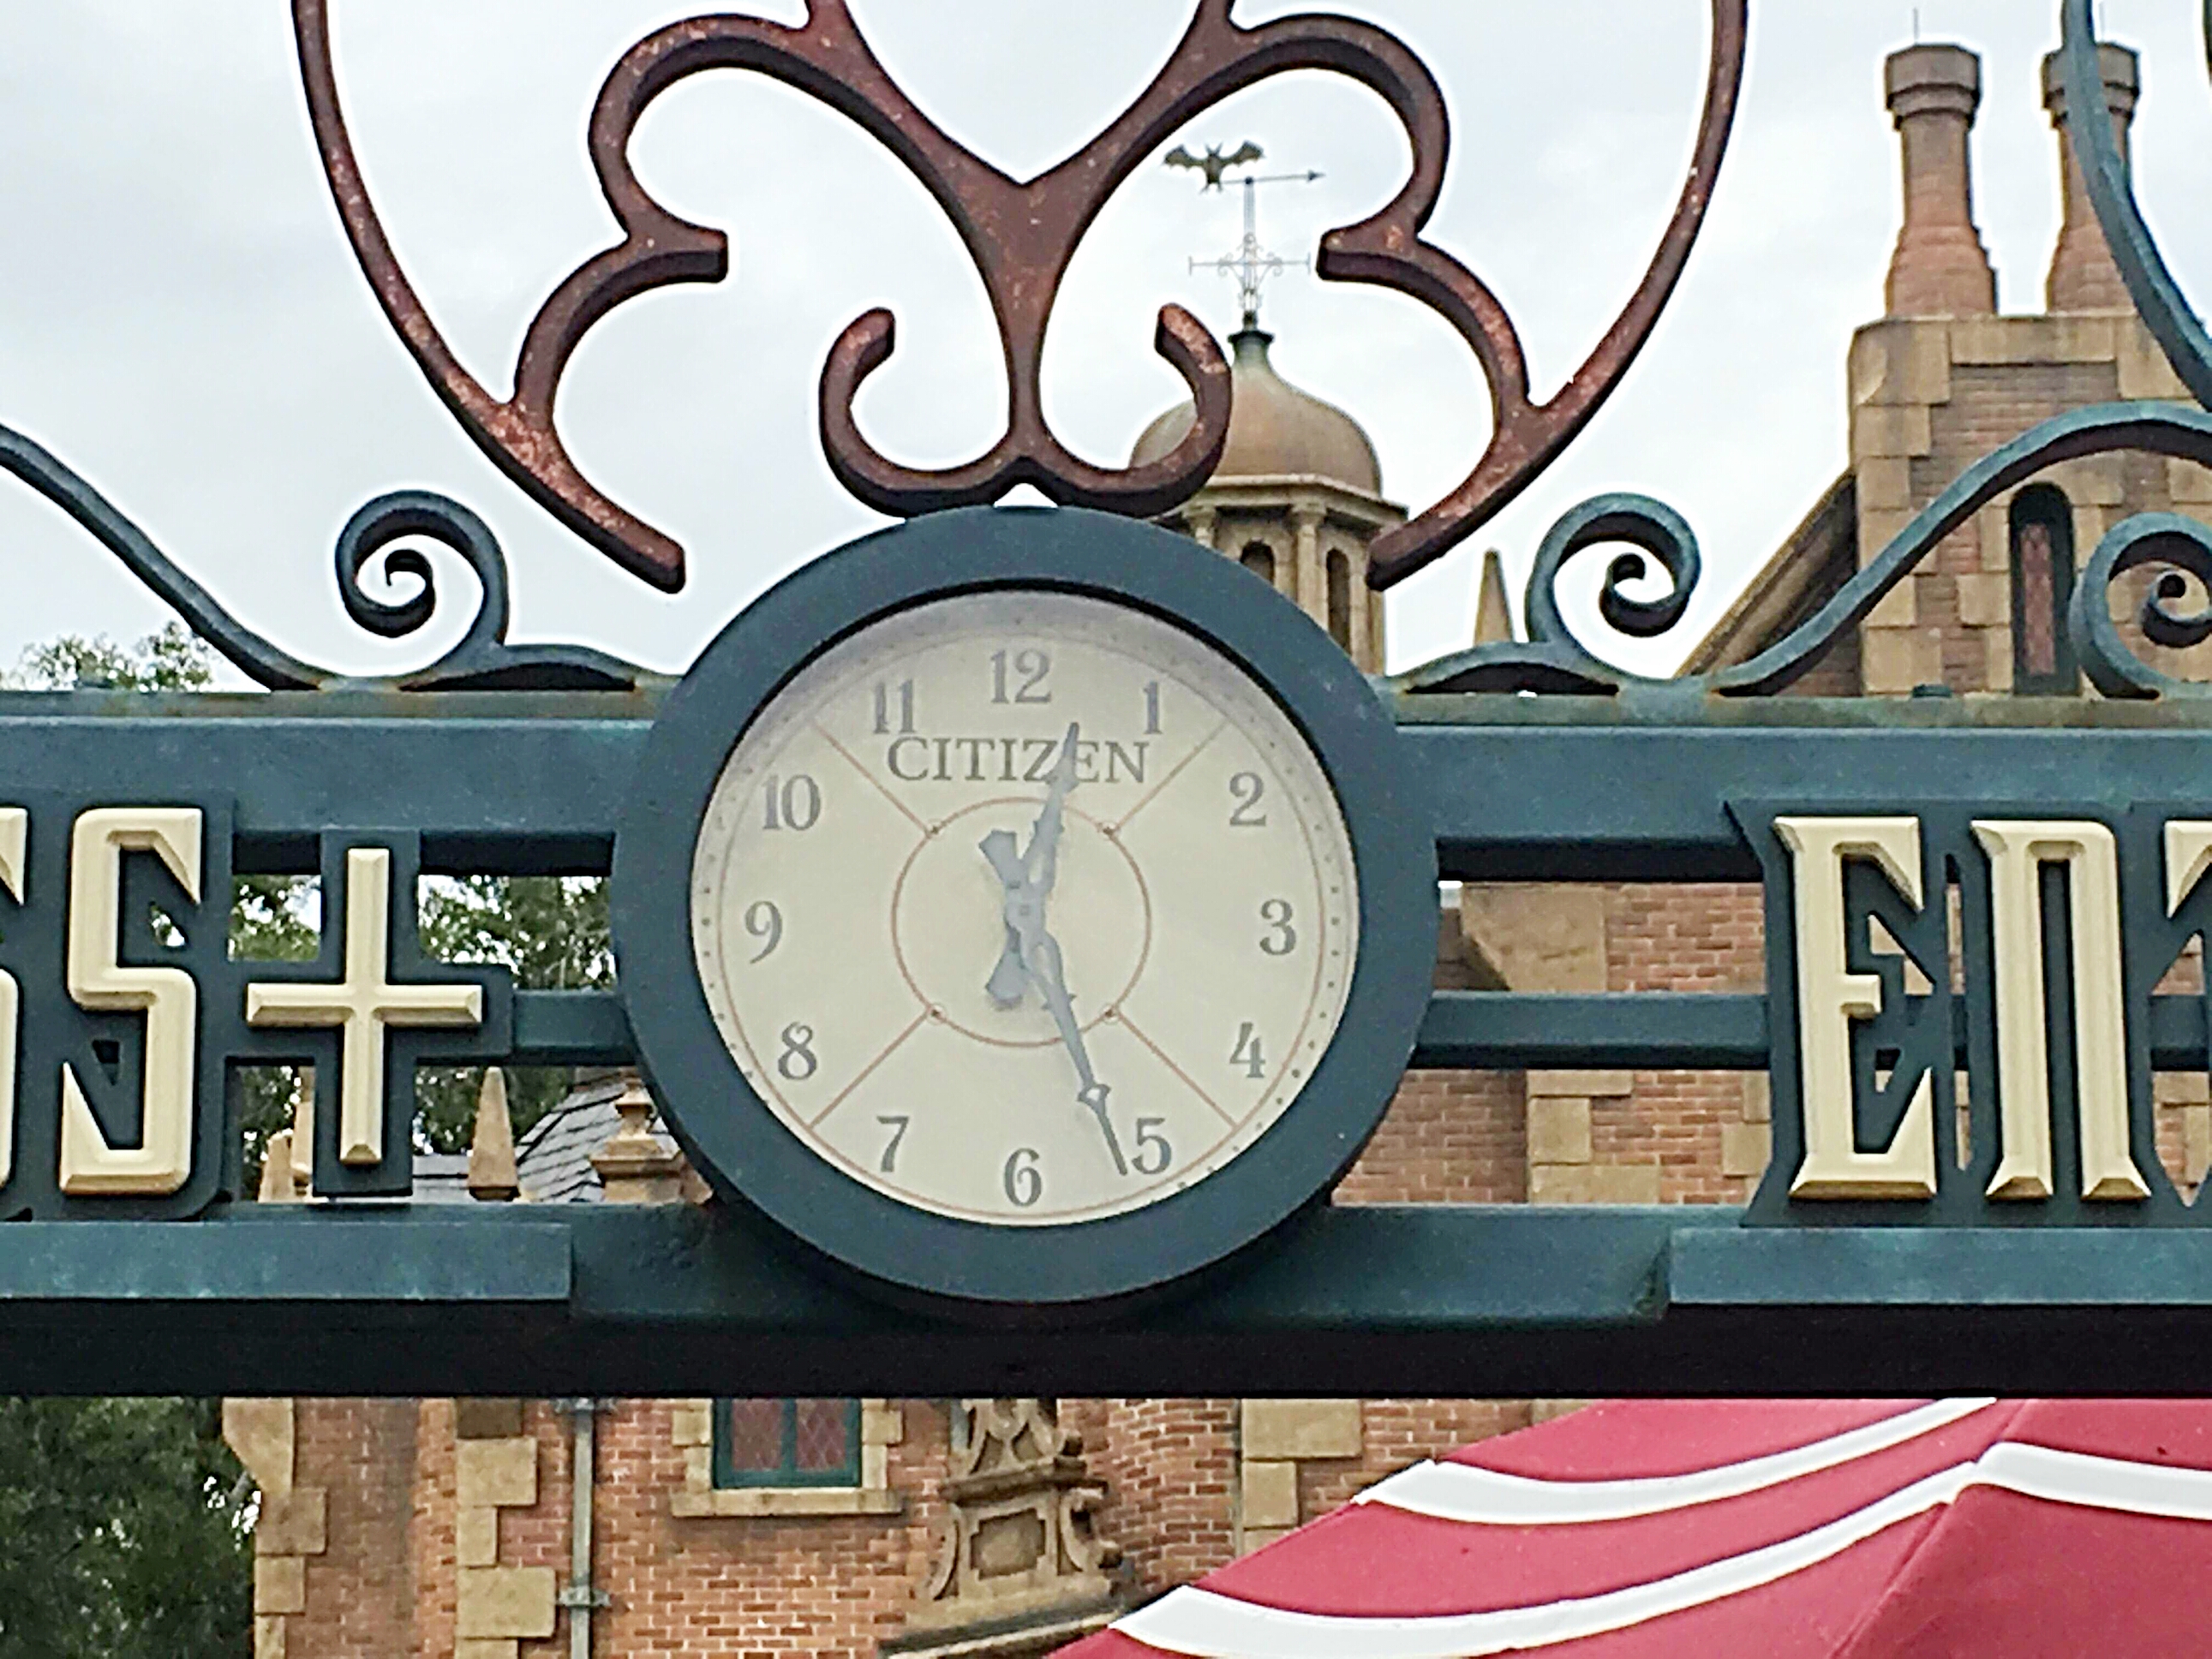 Citizen Is Now the Official Time Piece Of Disney Parks